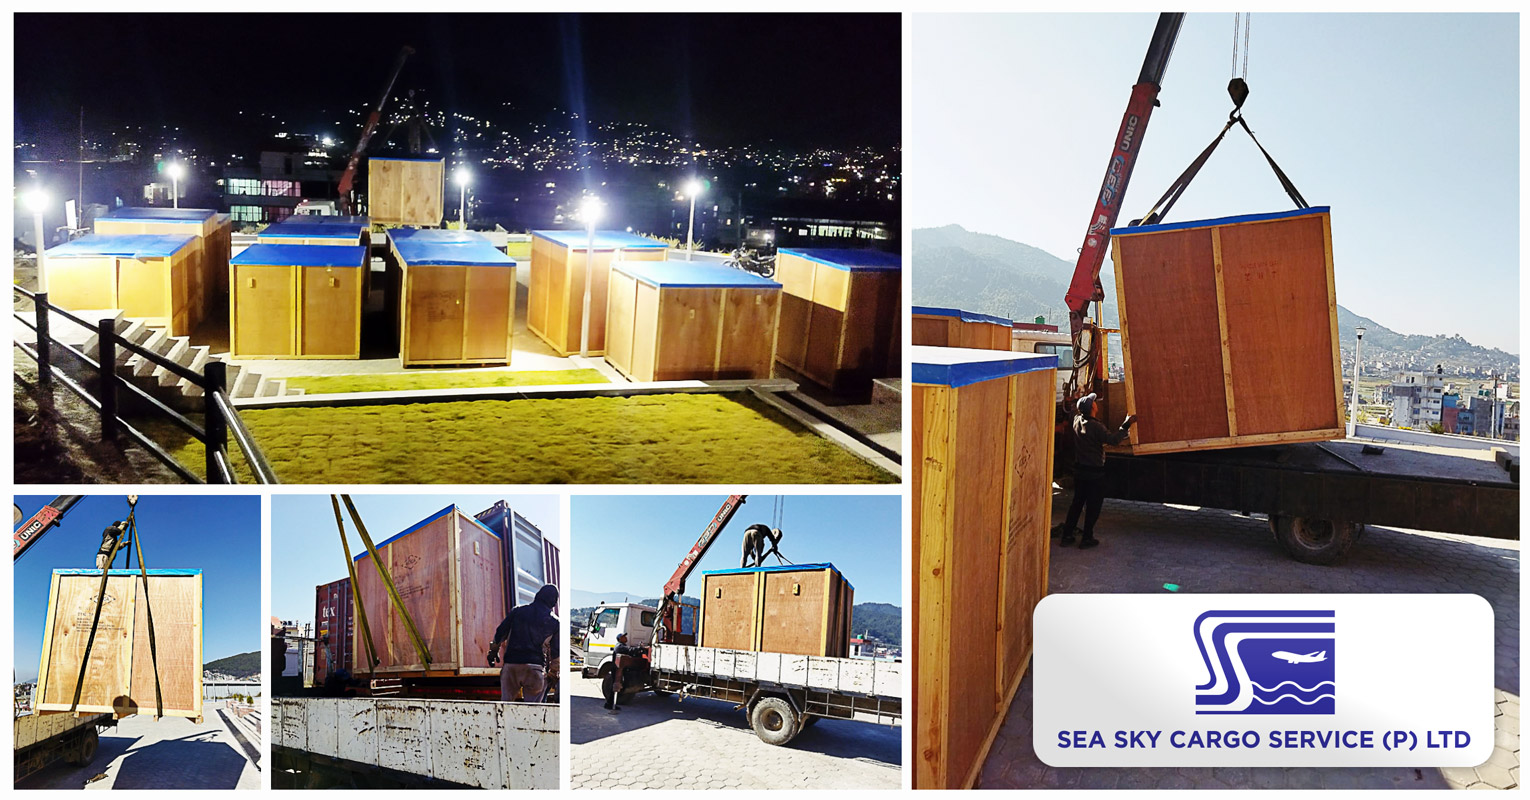 Sea Sky Cargo is Handling 40 x 40ft Containers at Kathmandu, Nepal